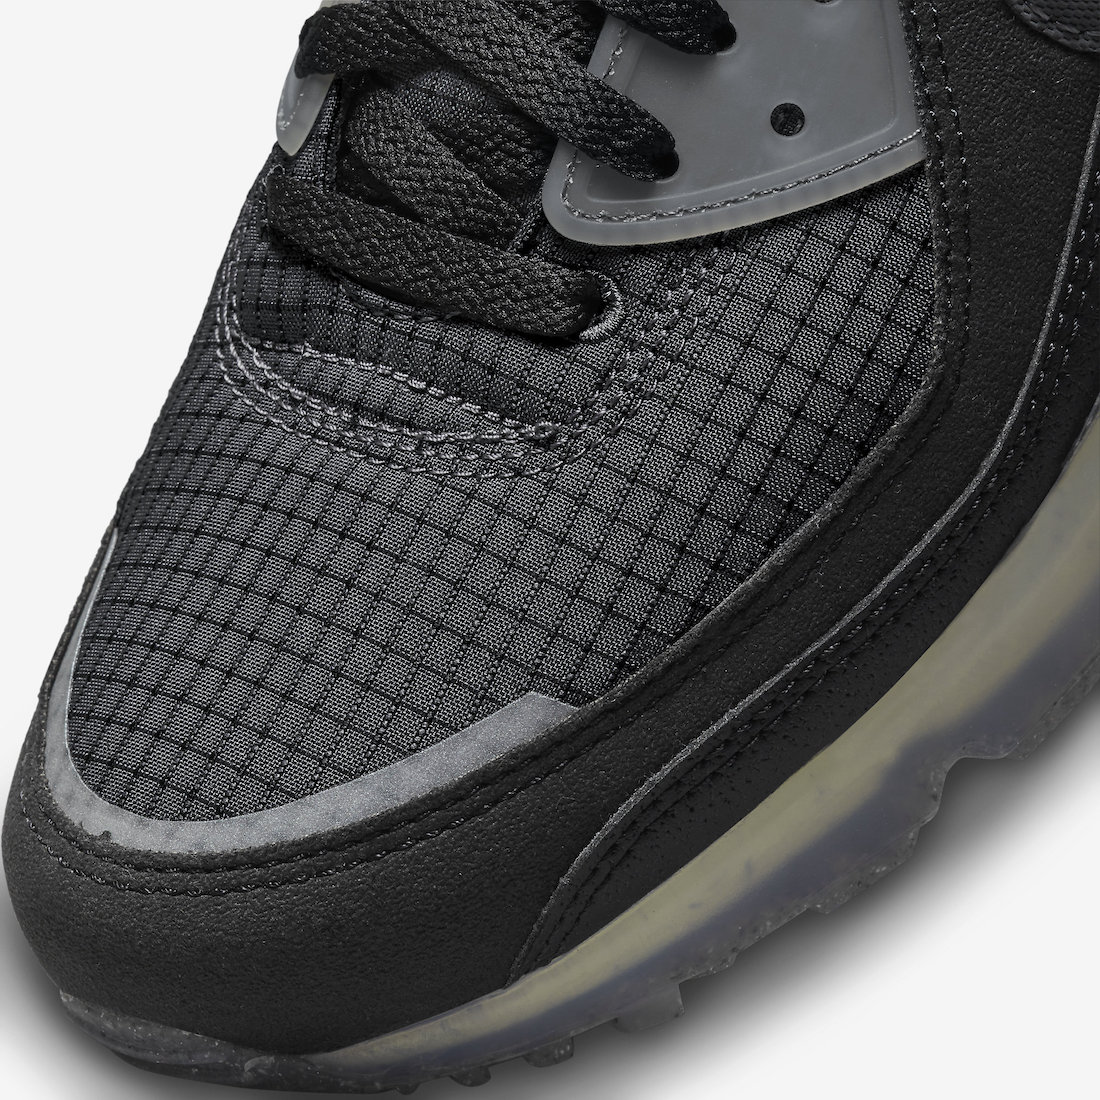 Nike-Air-Max-90-Terrascape-Anthracite-DH2973-001-Release-Date-6